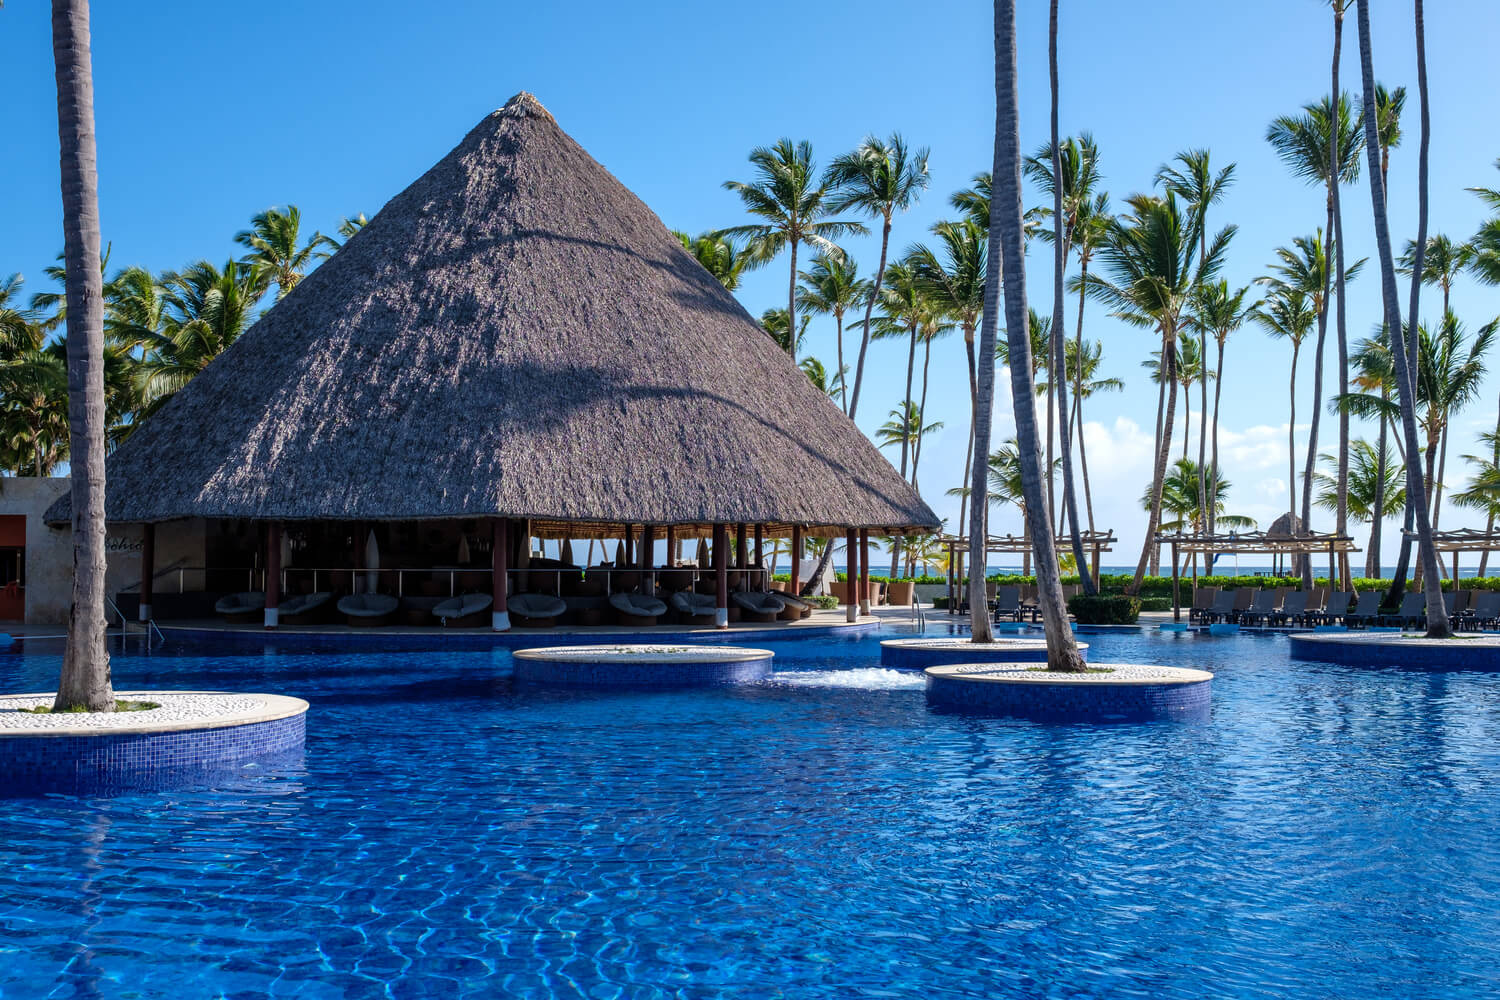 Book your stay at the Barceló Bávaro Grand Resort in Punta Cana during whale season in the Dominican Republic 